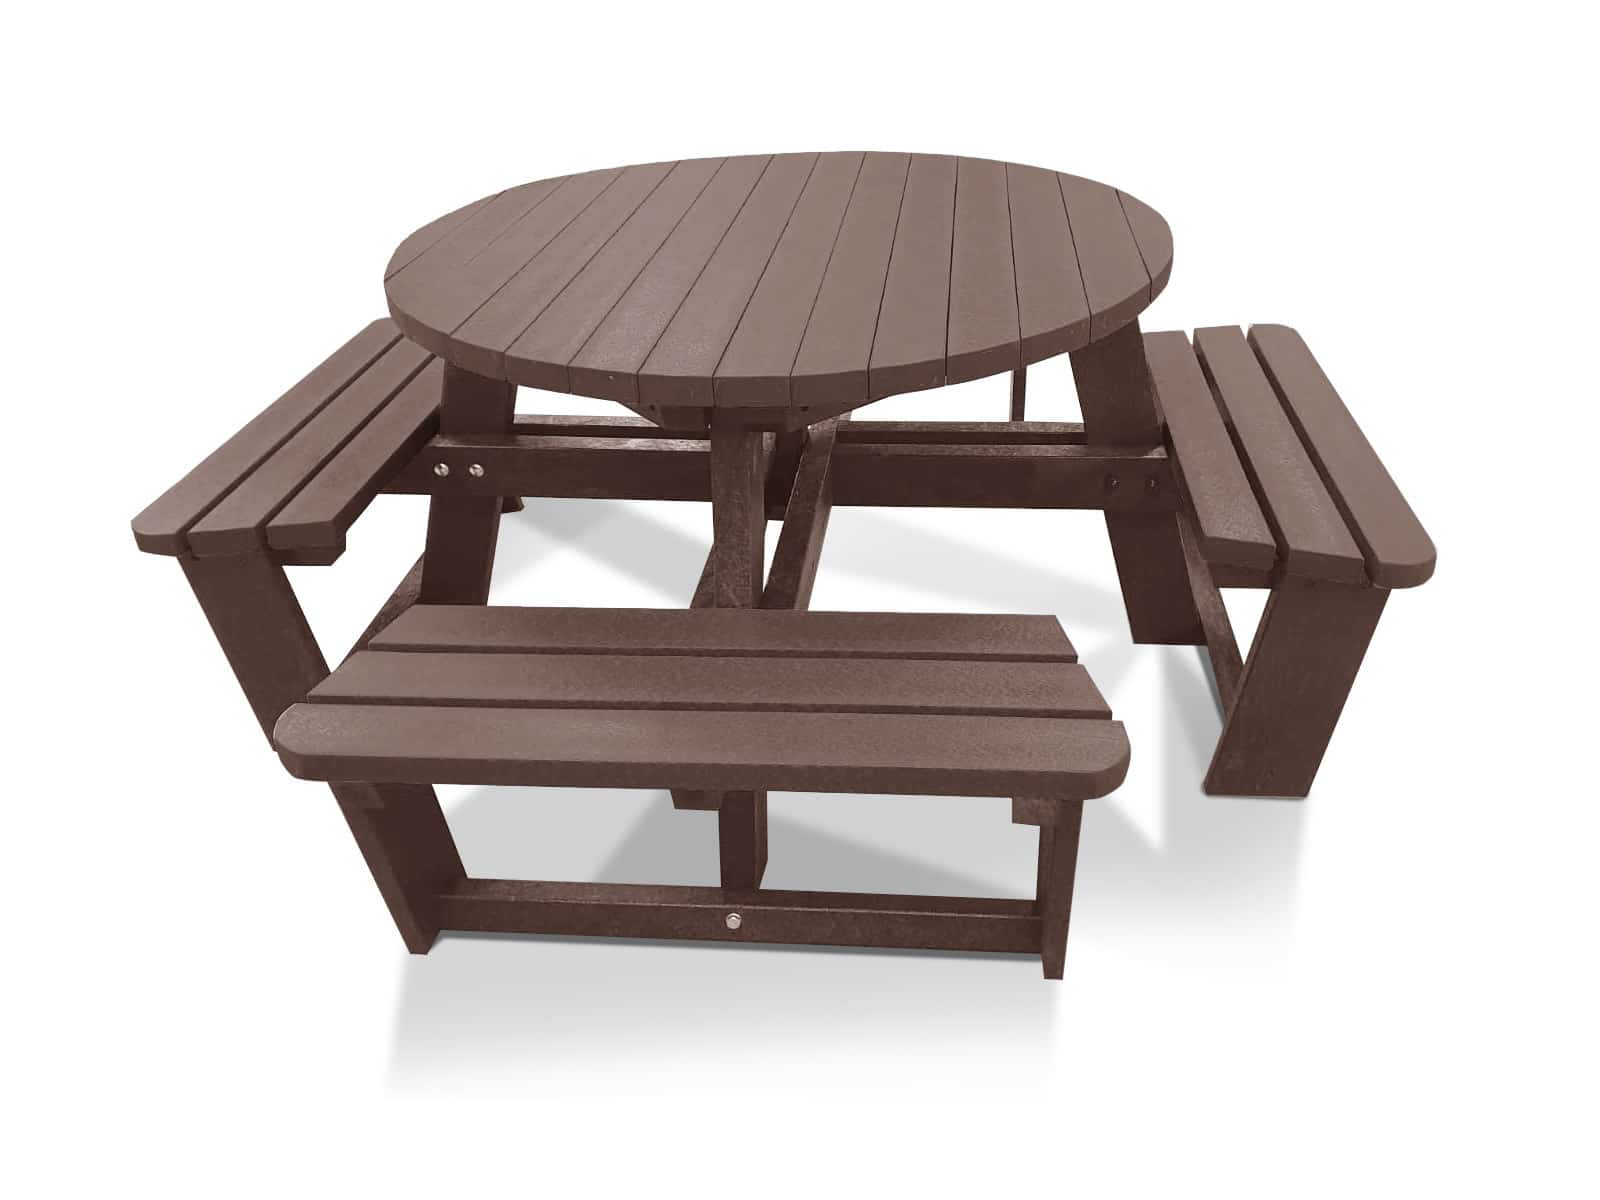 Calder Picnic Table Assembly Guide